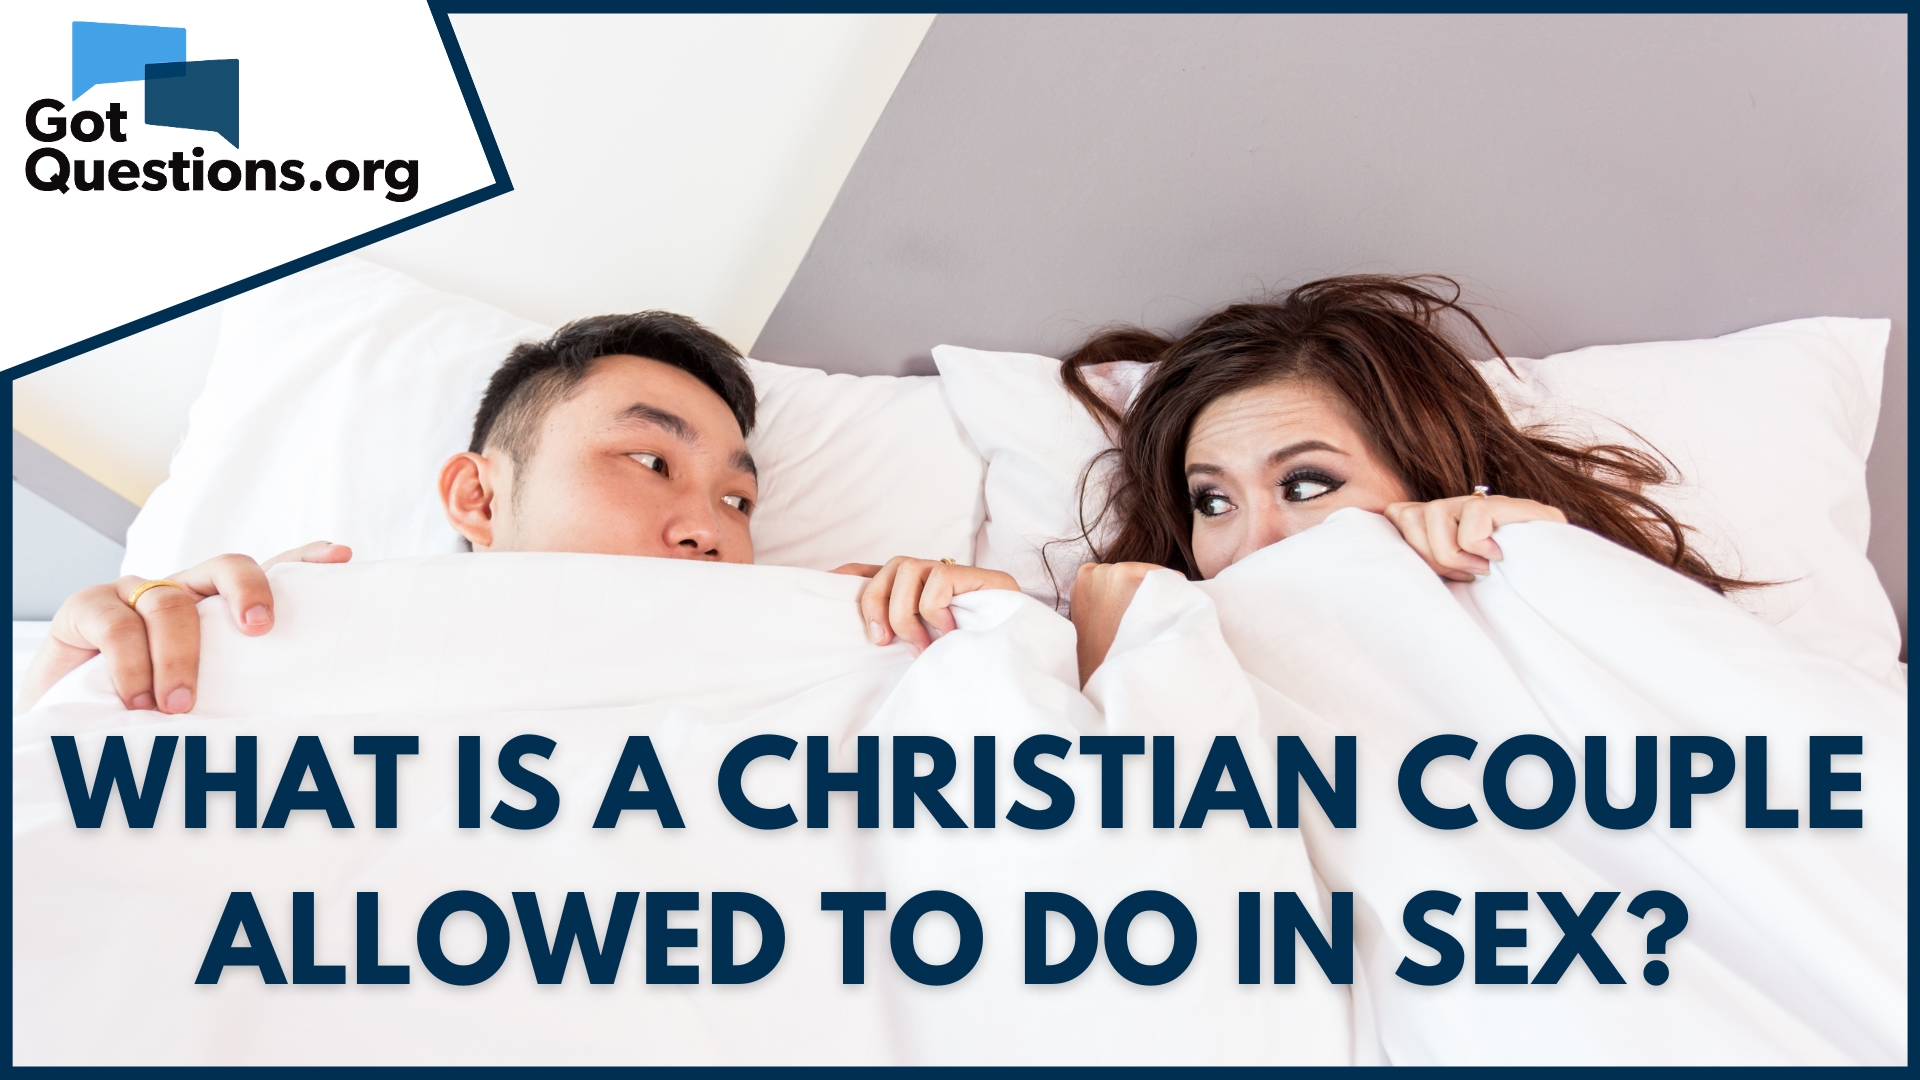 What is a Christian couple allowed to do in sex?